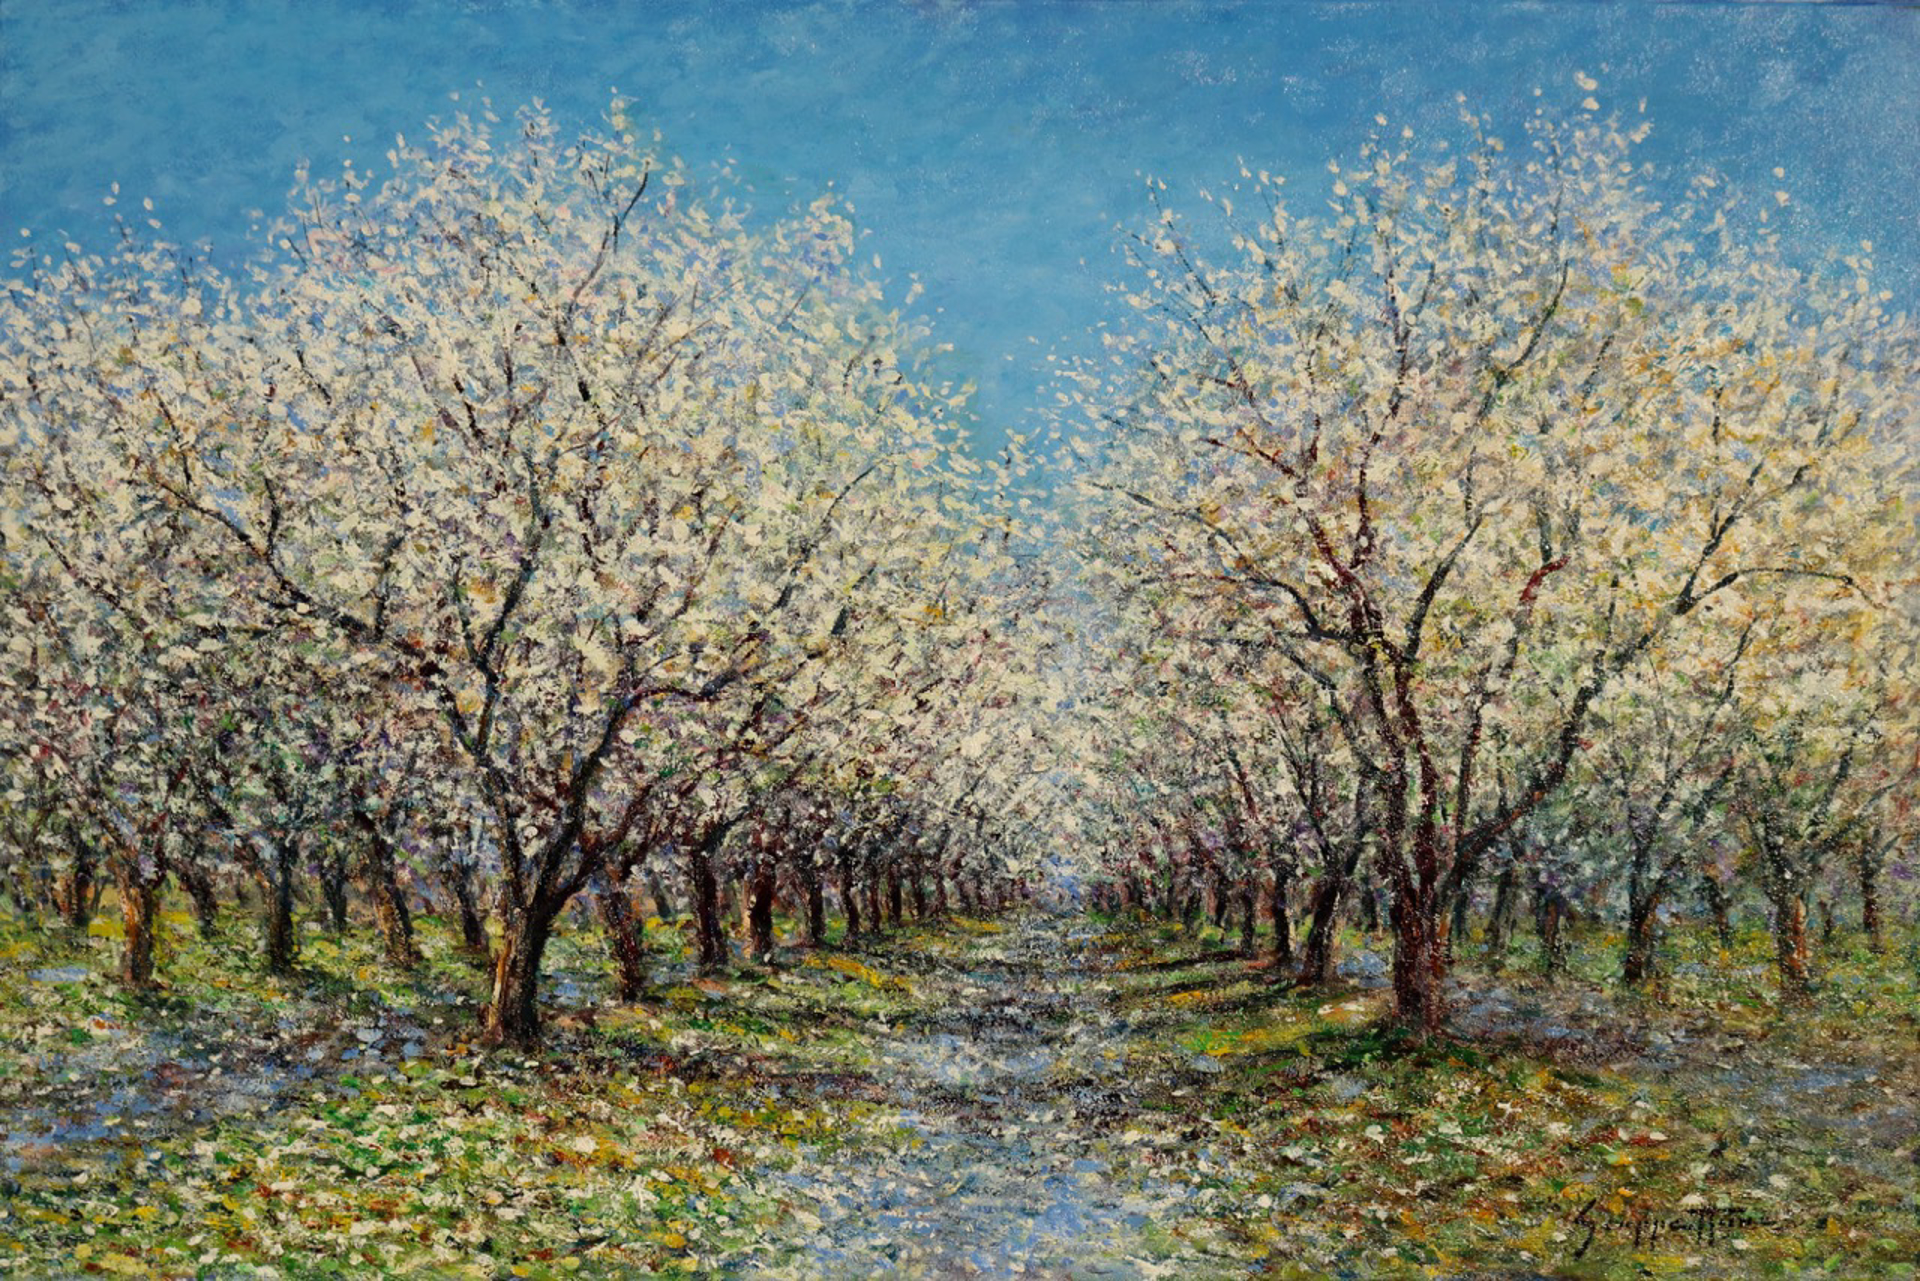 The Almond Grove (AP) by James Scoppettone